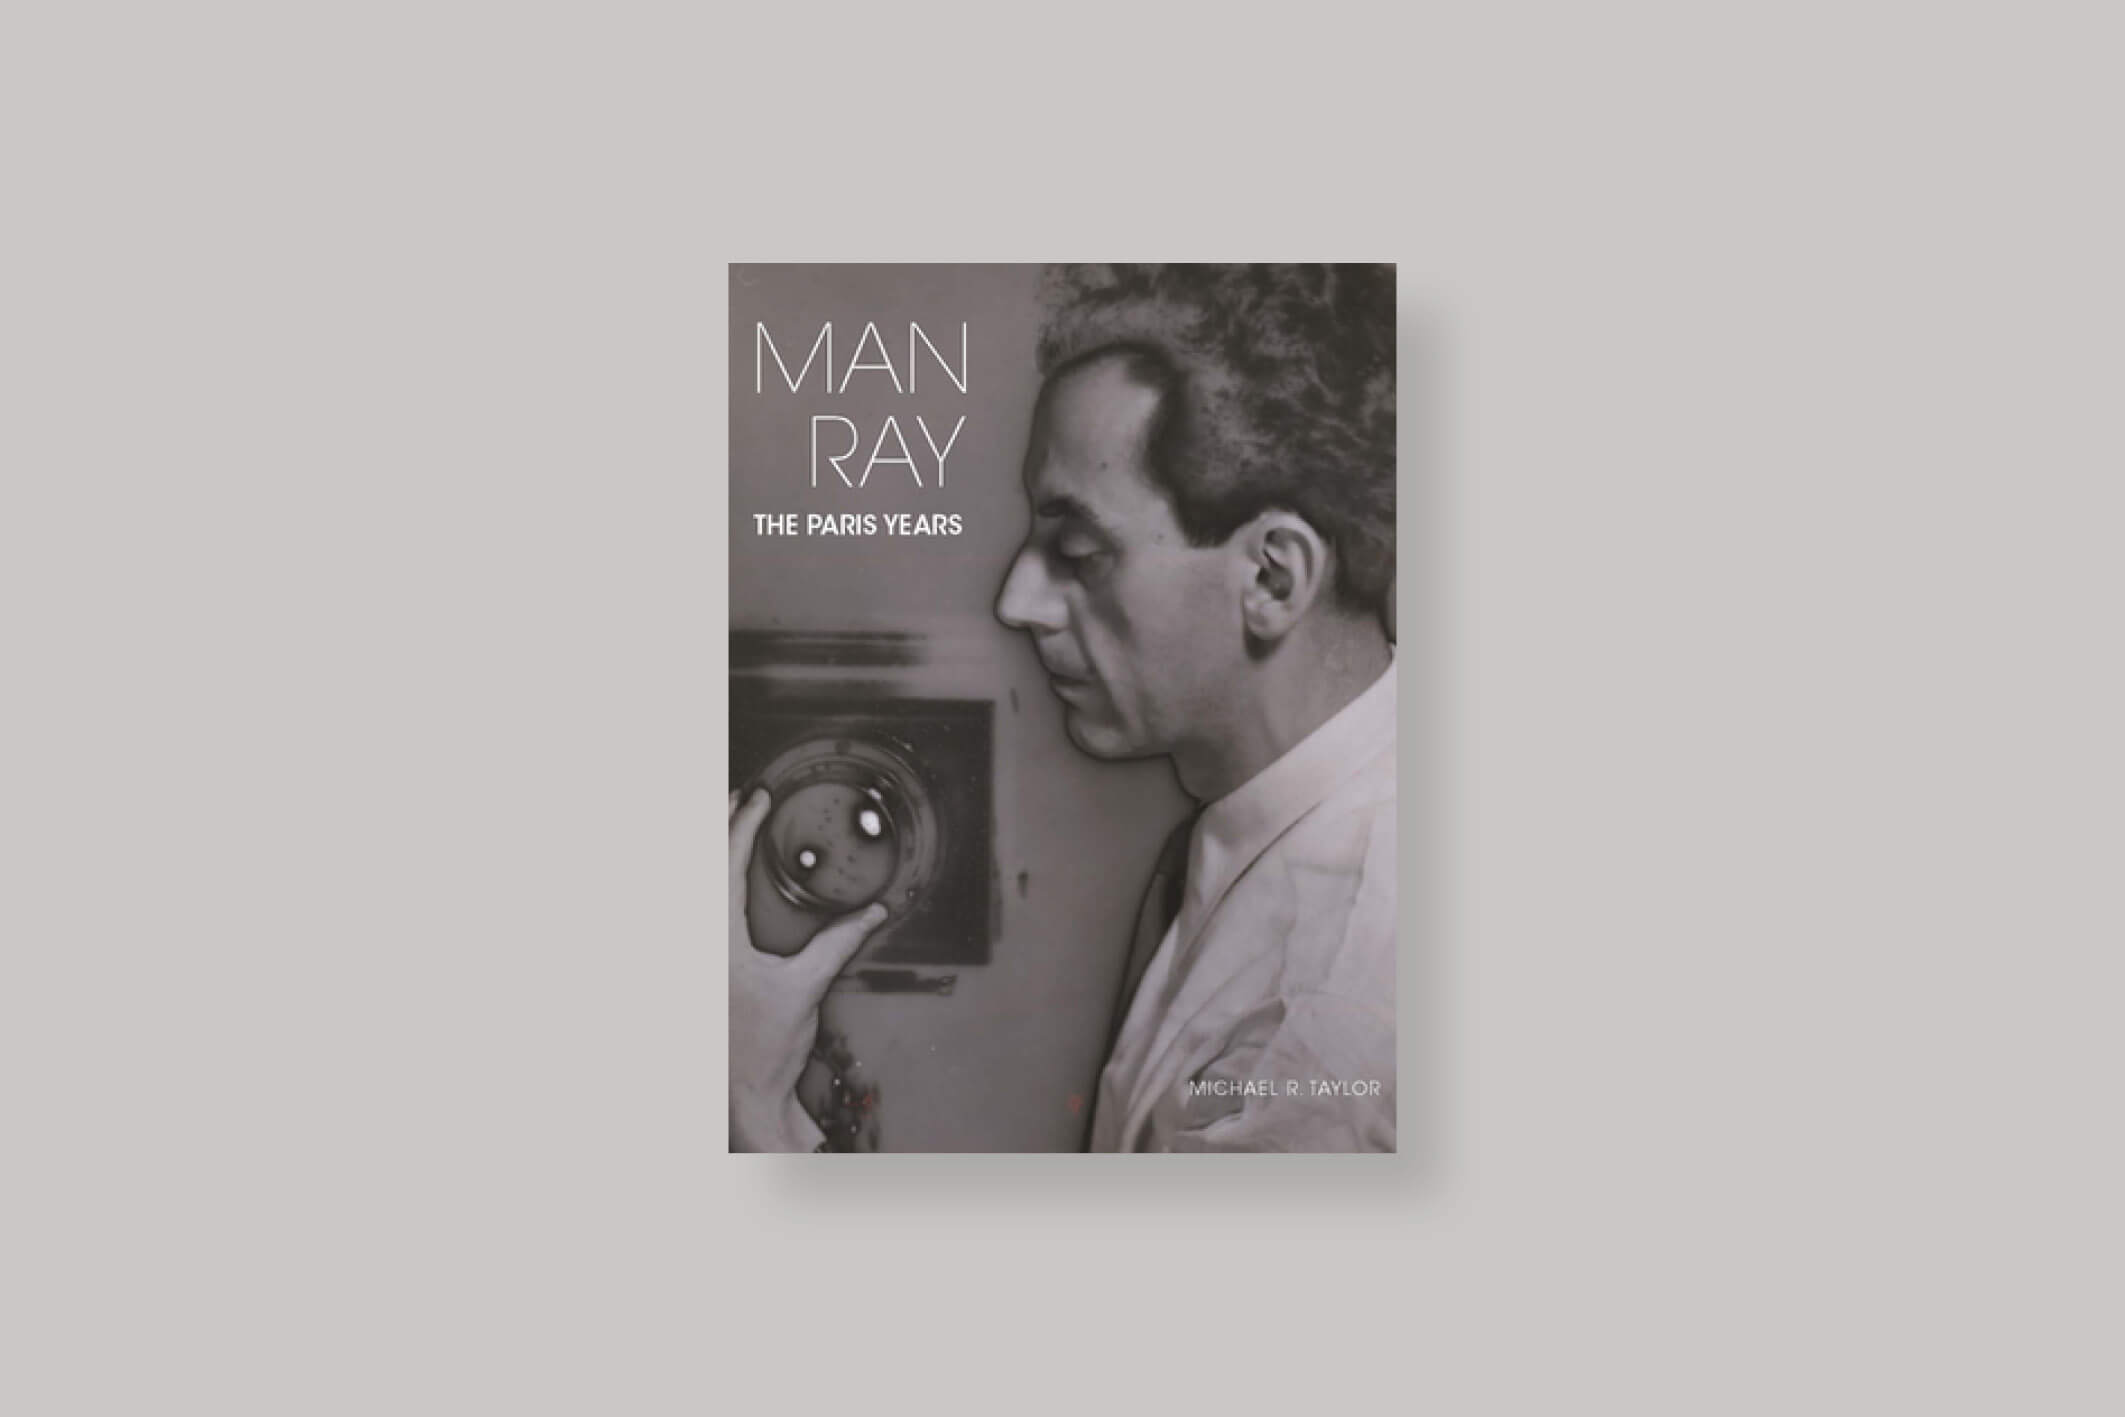 Man-Ray-The-Paris-Year-Michael-R-Taylor-Virginia-Museum-of-fine-arts-cover